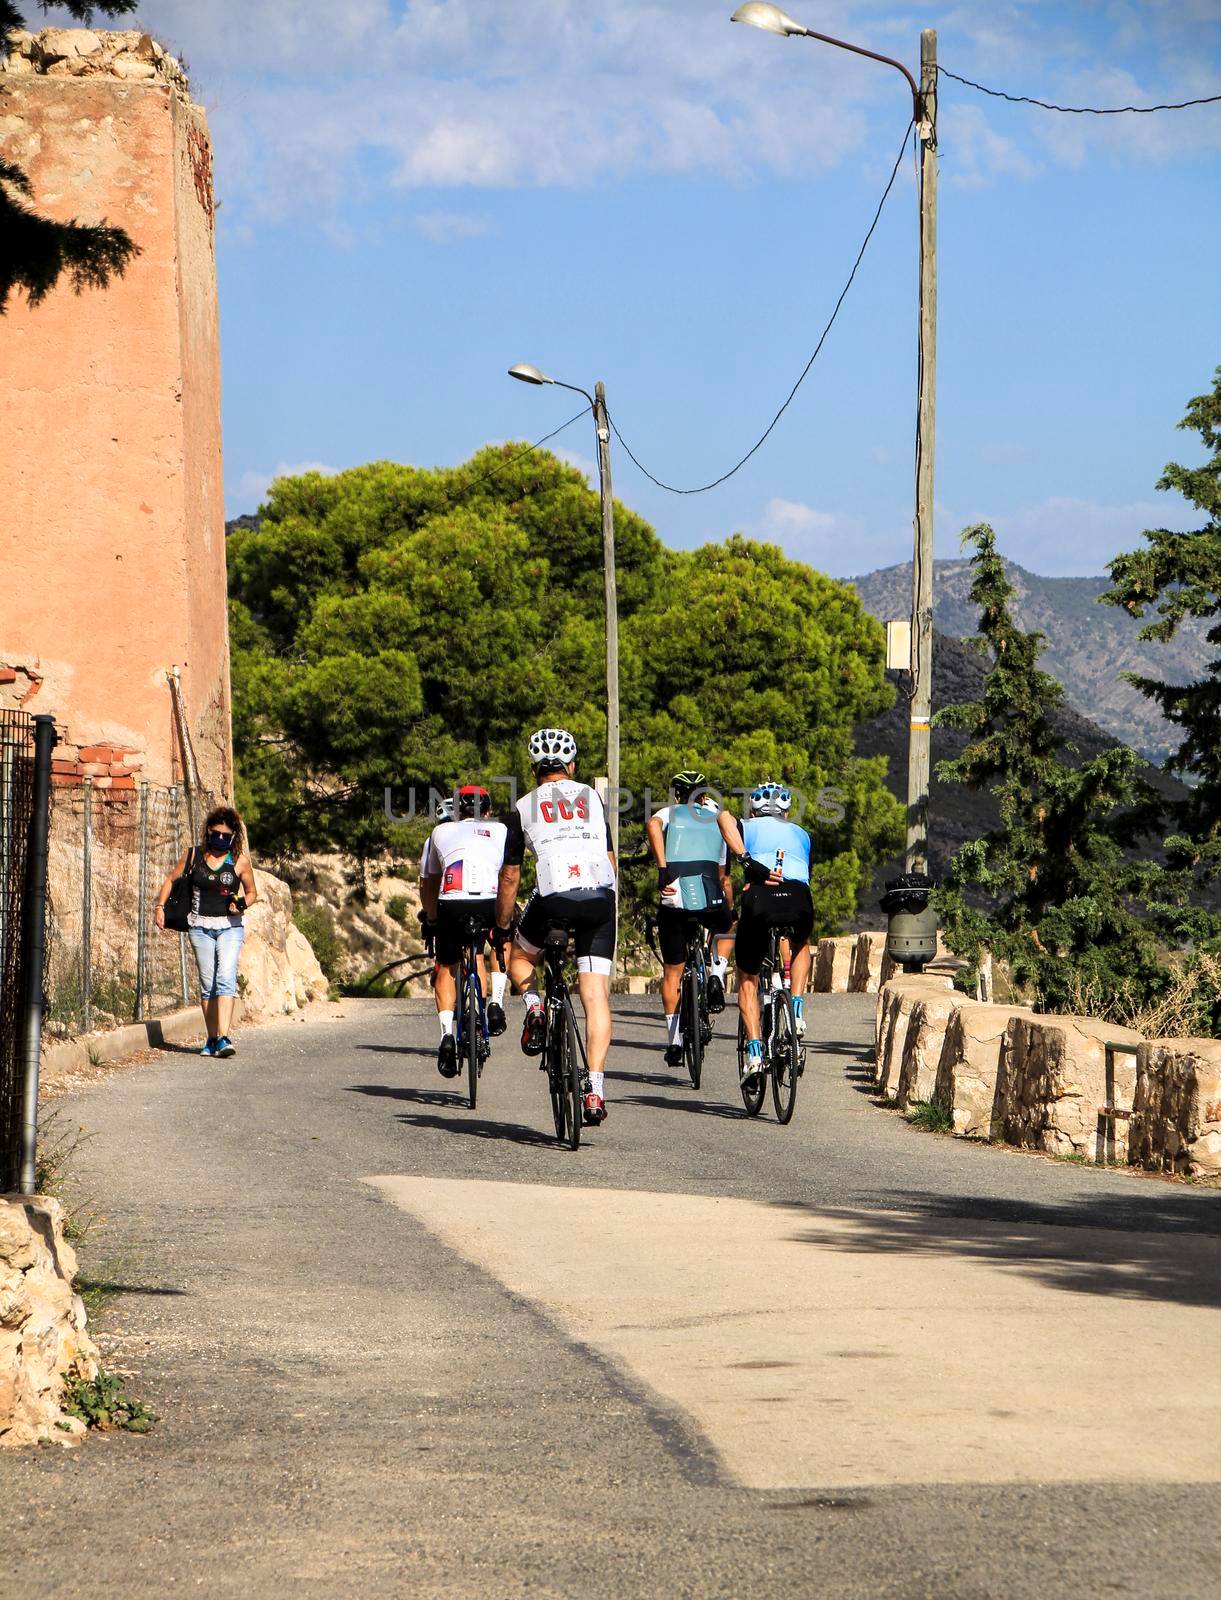 Alicante, Spain- September 18, 2021: Group of cyclists riding on a mountain road in Alicante on a sunny day of summer